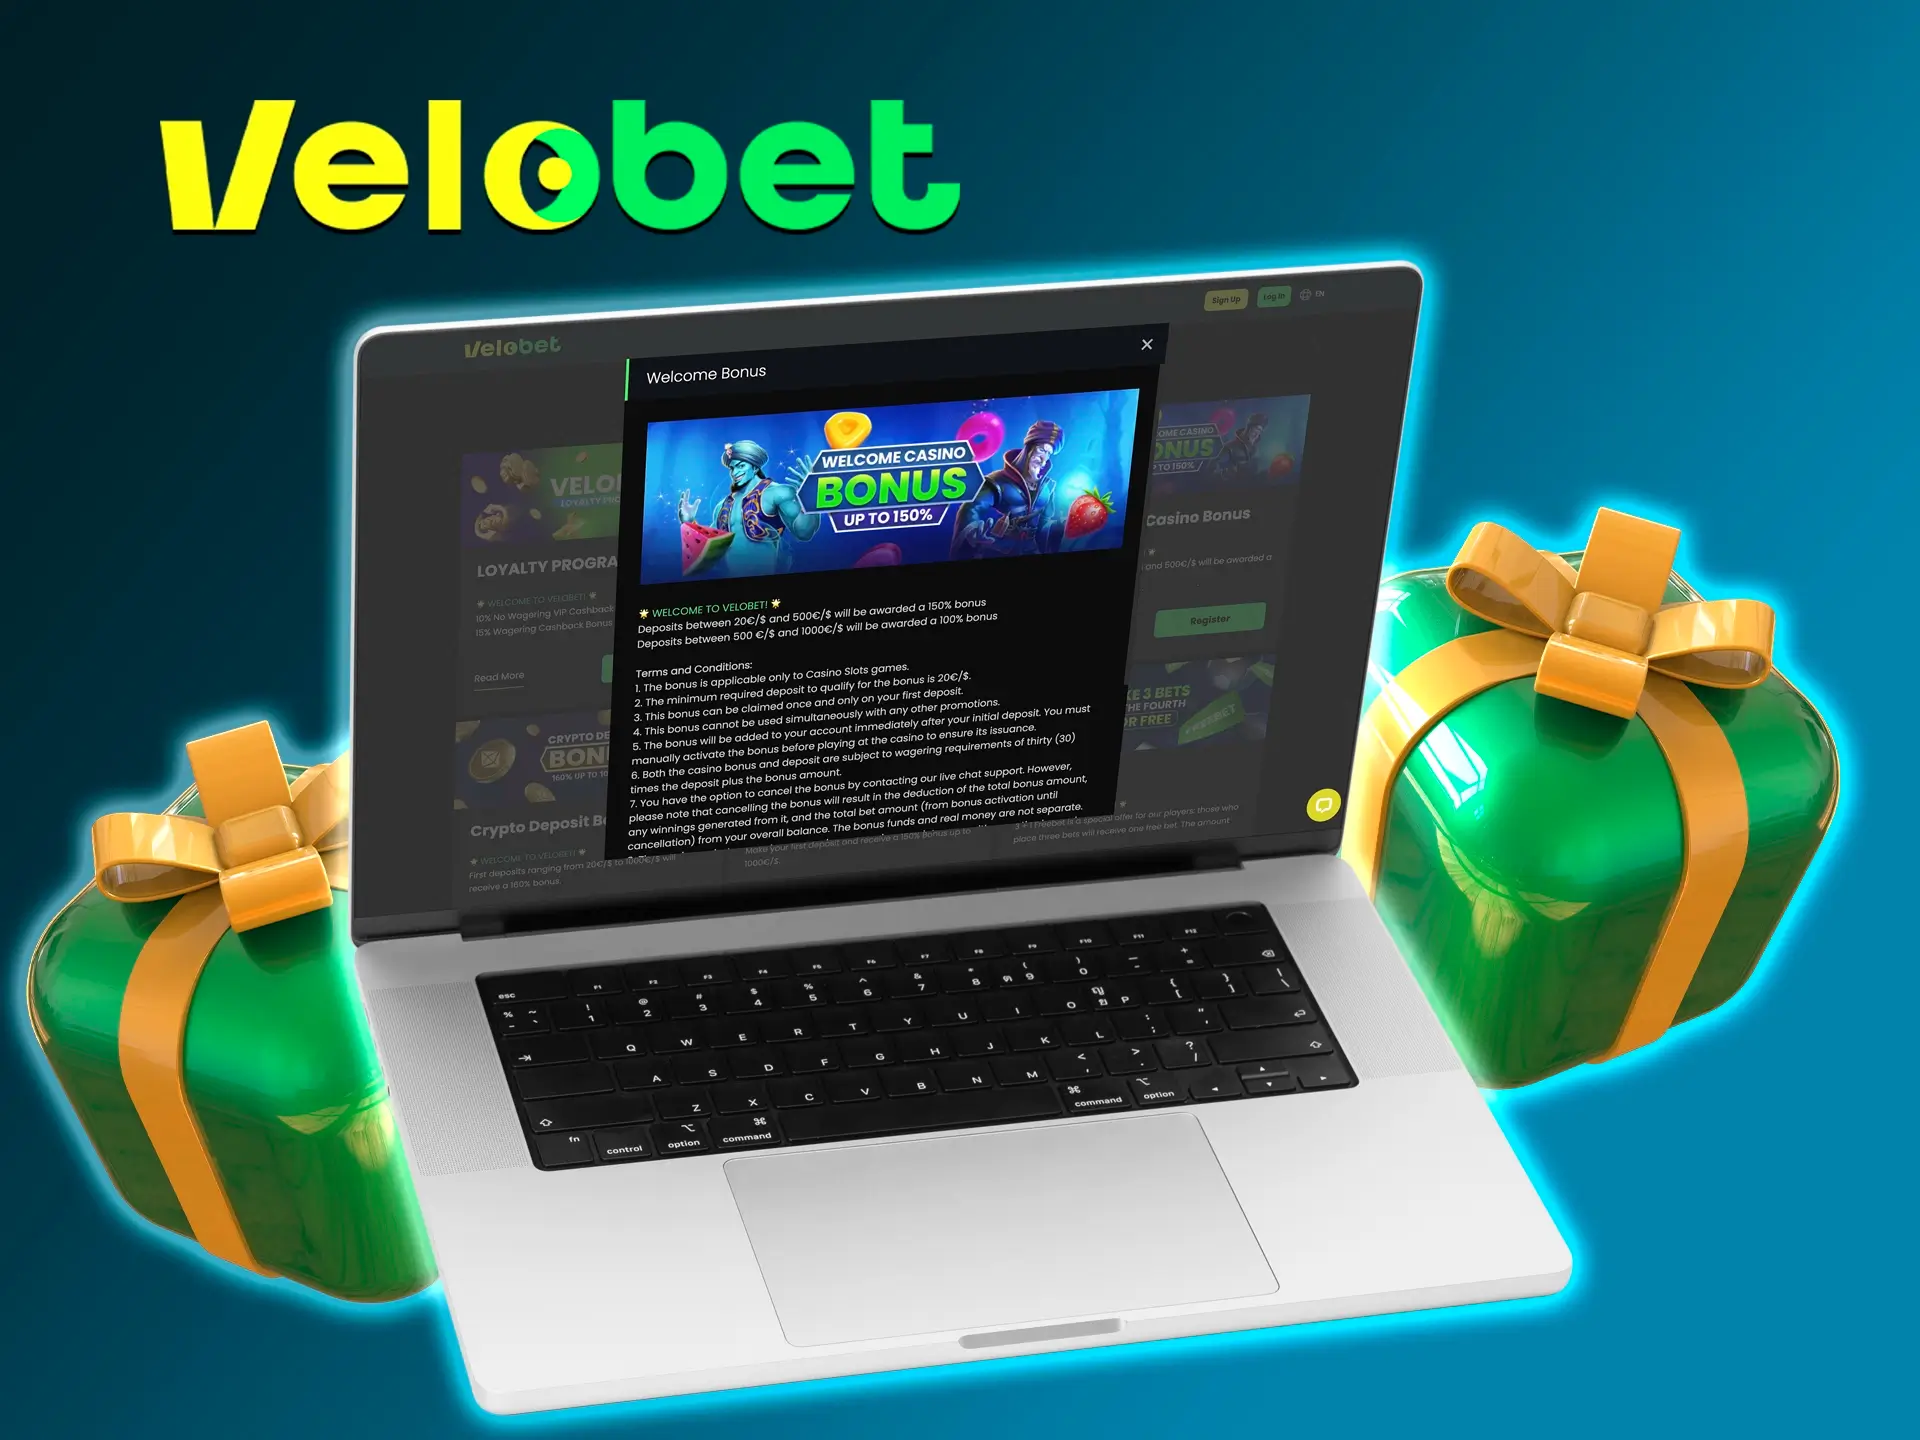 Get a bonus from Velobet Casino to boost your deposit and winnings.